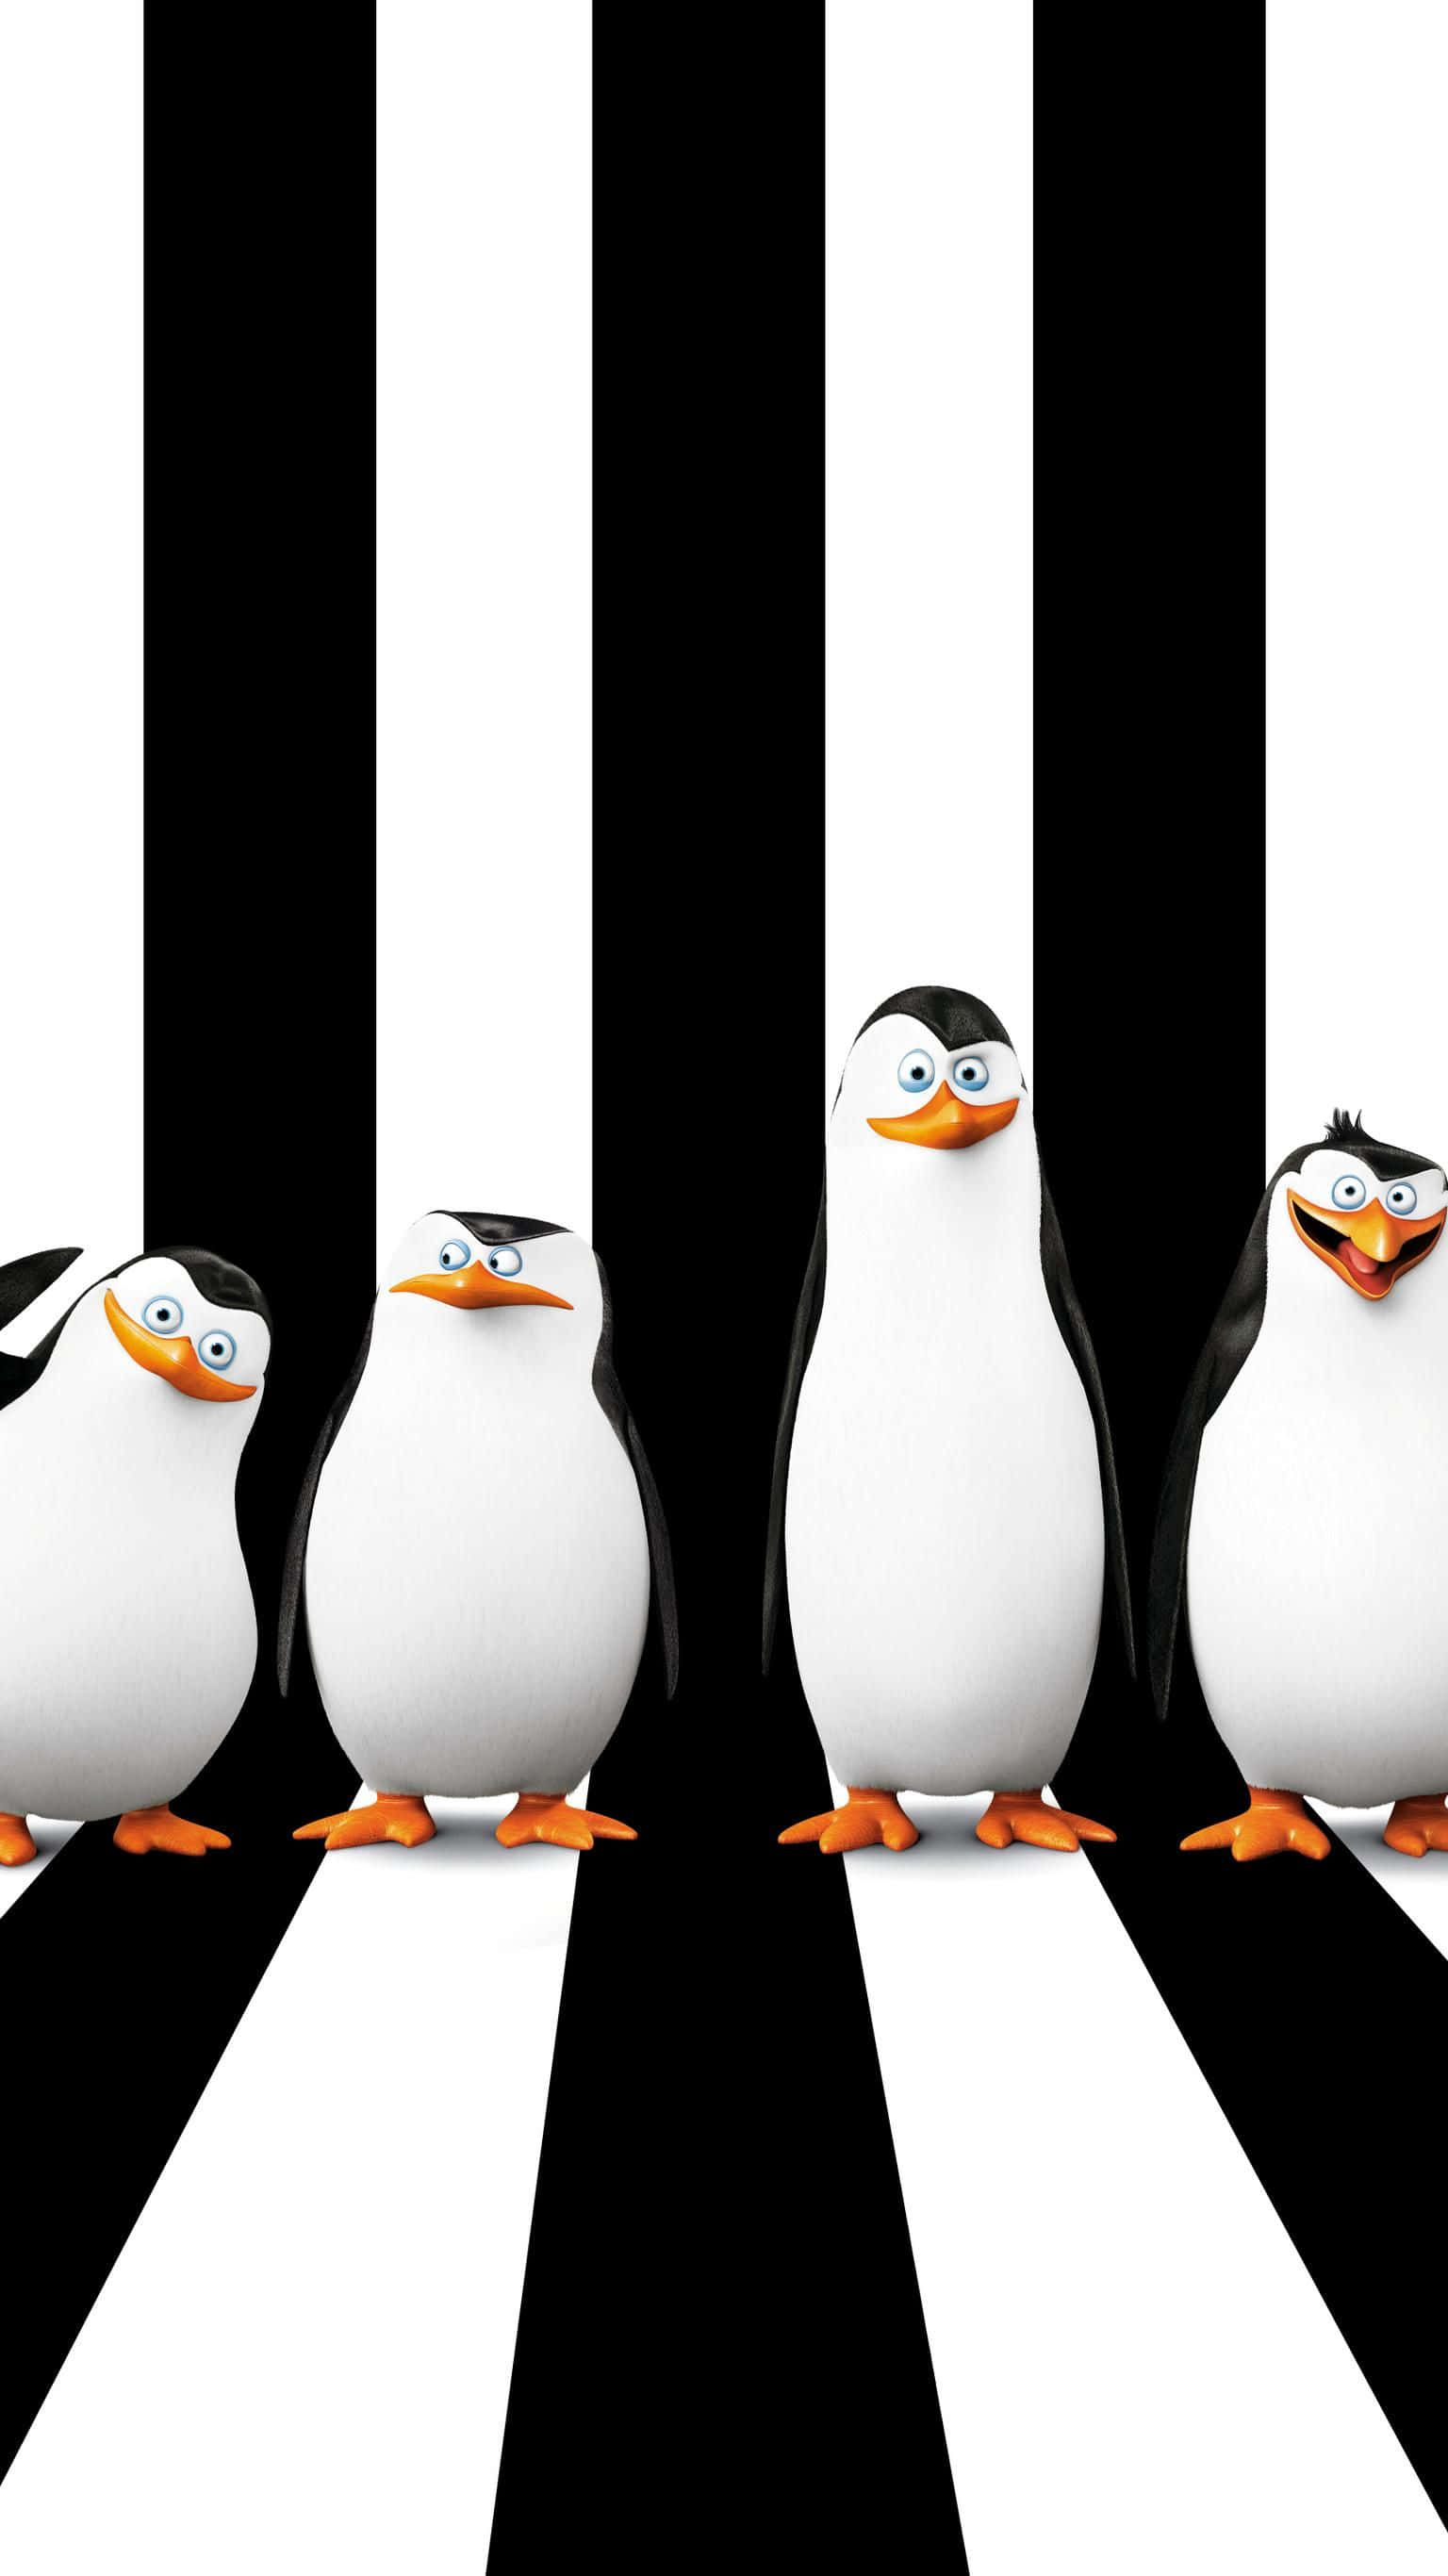 Welcome Winter Wonderland - Enjoy your winter adventure with a charming Penguin